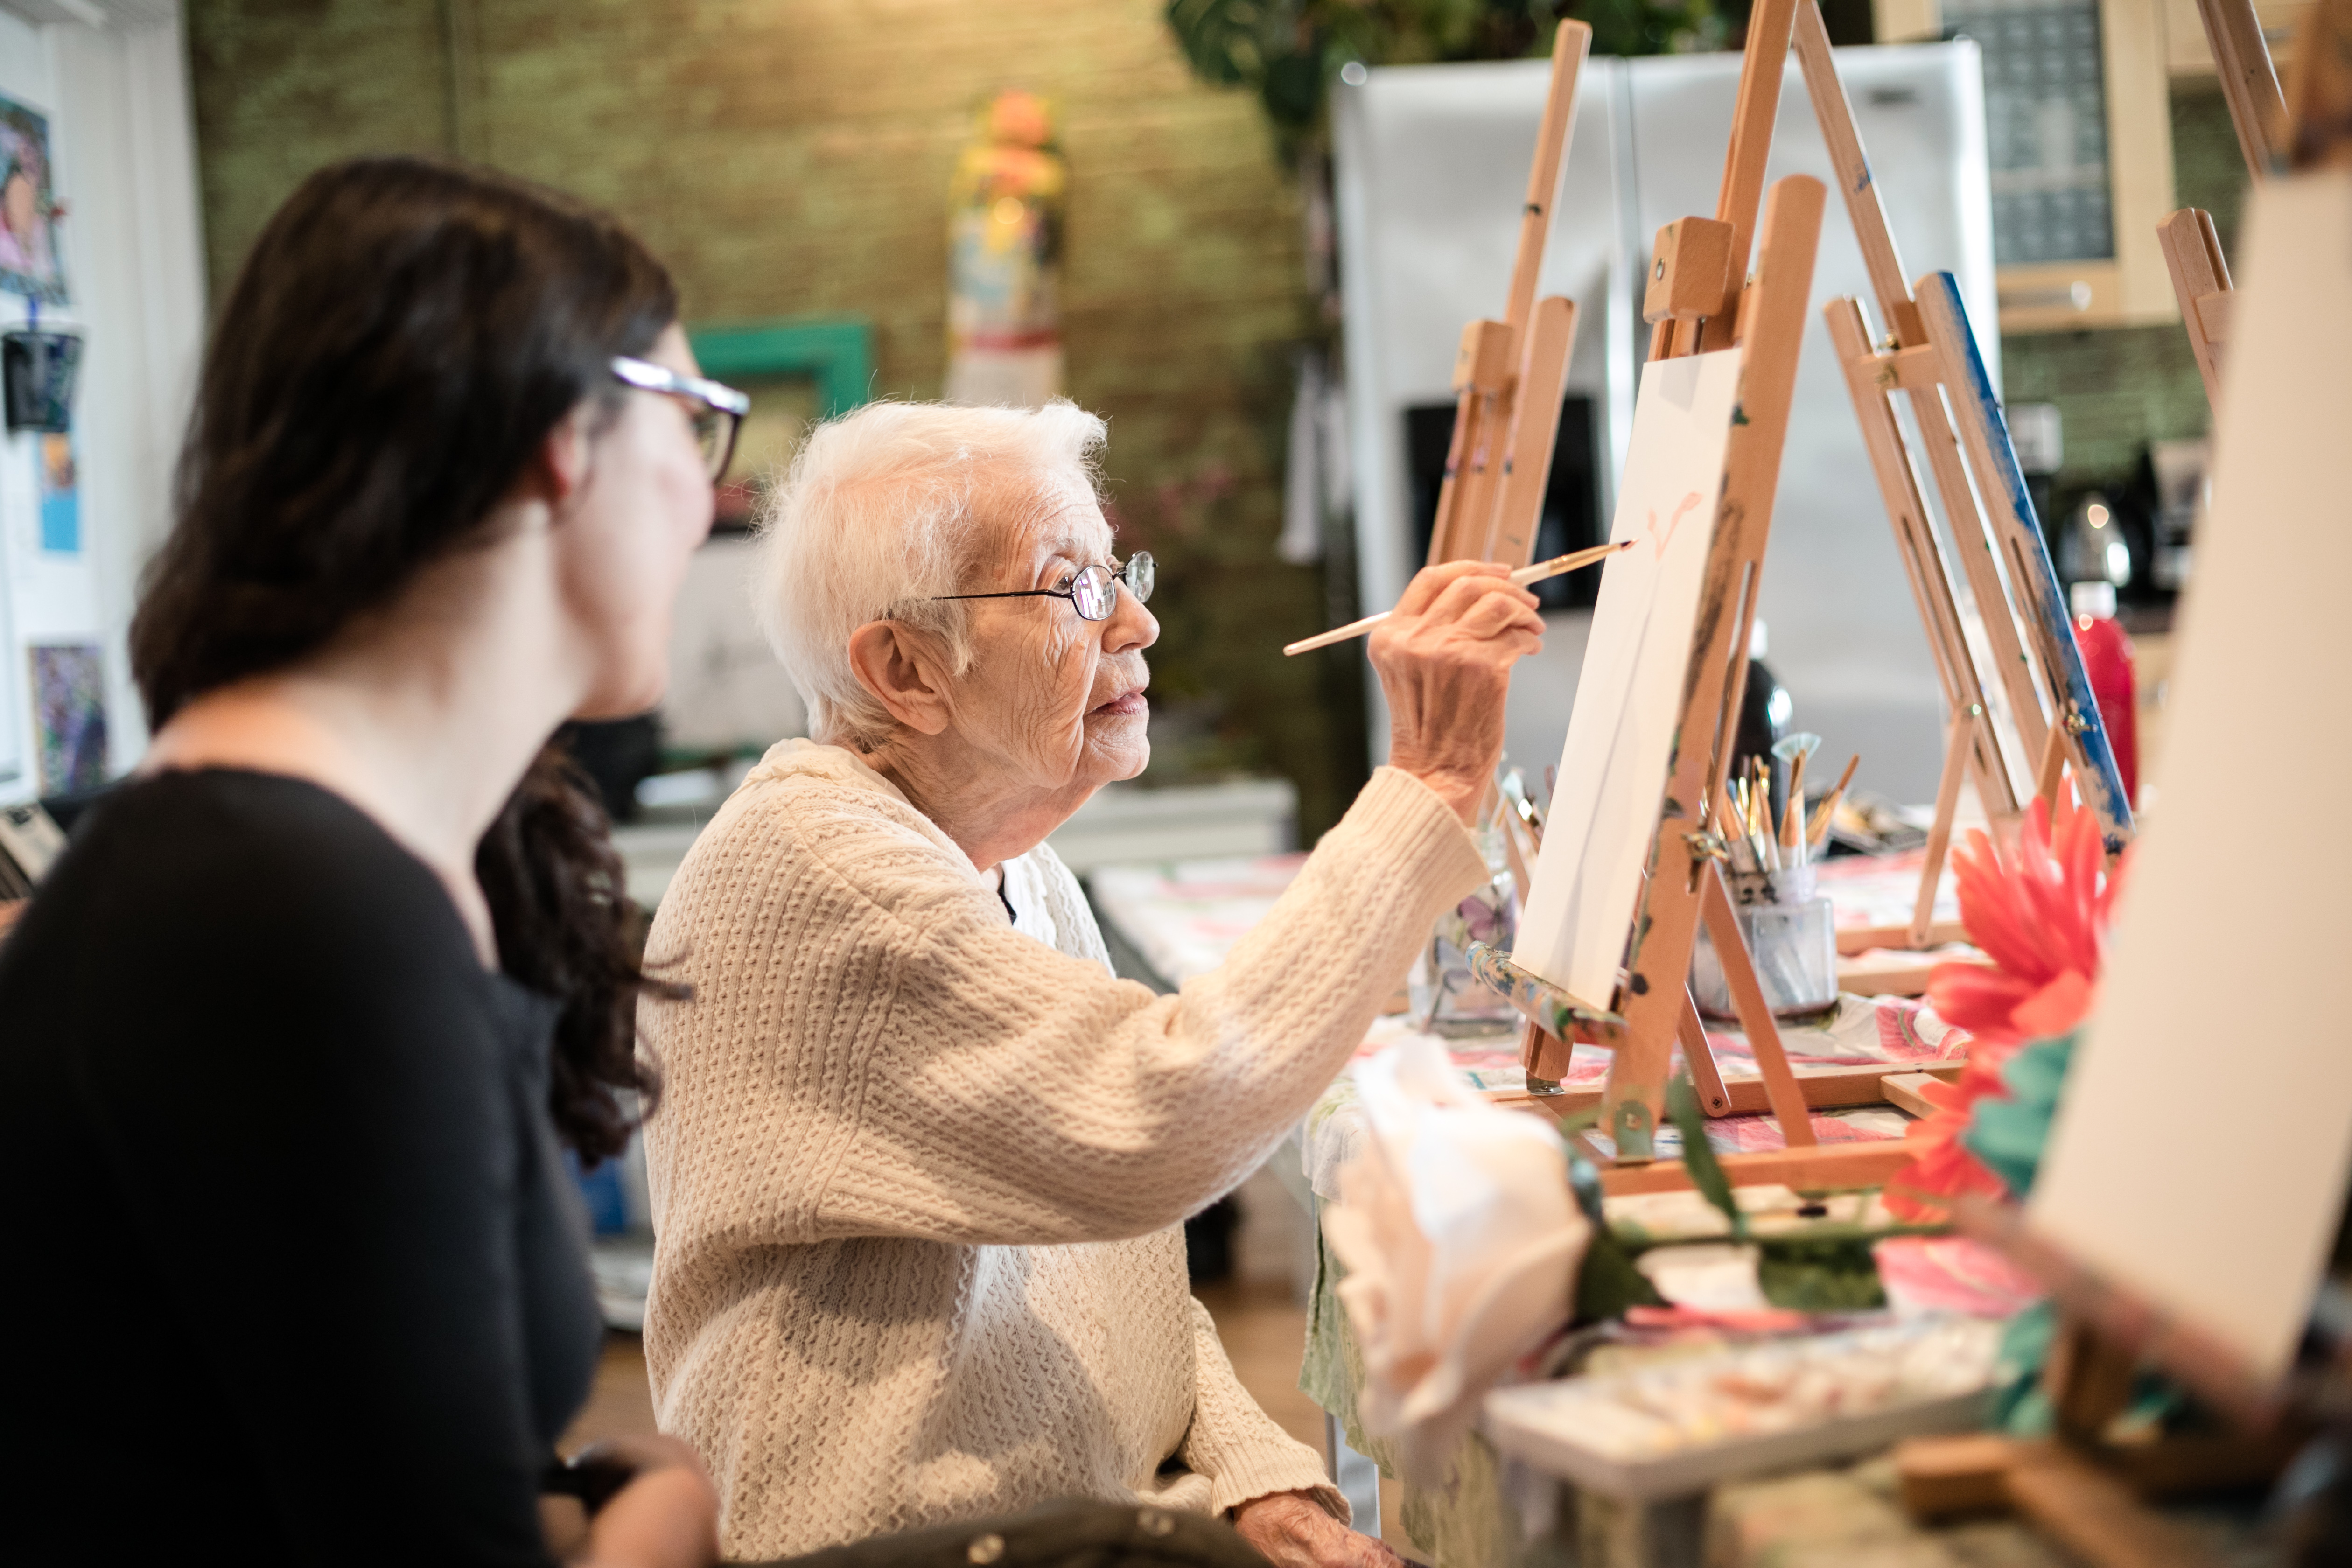 Physical Benefits of Arts and Crafts for Elderly Adults